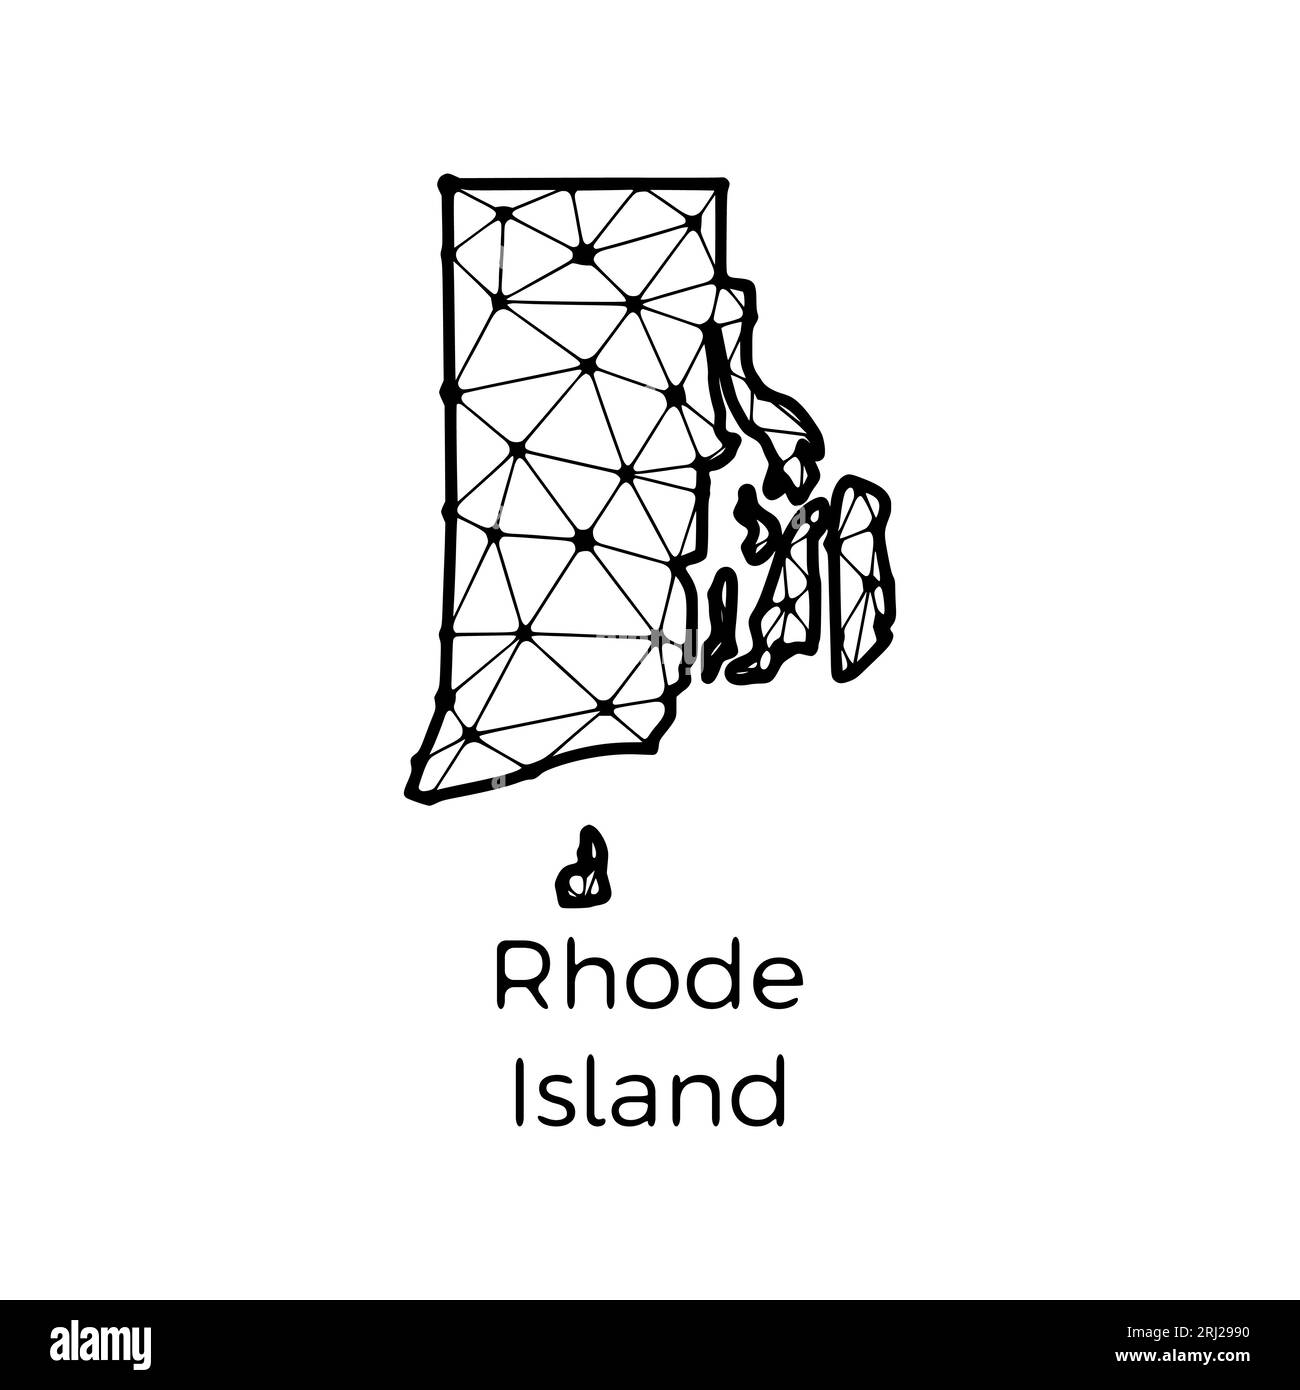 Rhode Island state map polygonal illustration made of lines and dots, isolated on white background. US state low poly design Stock Vector